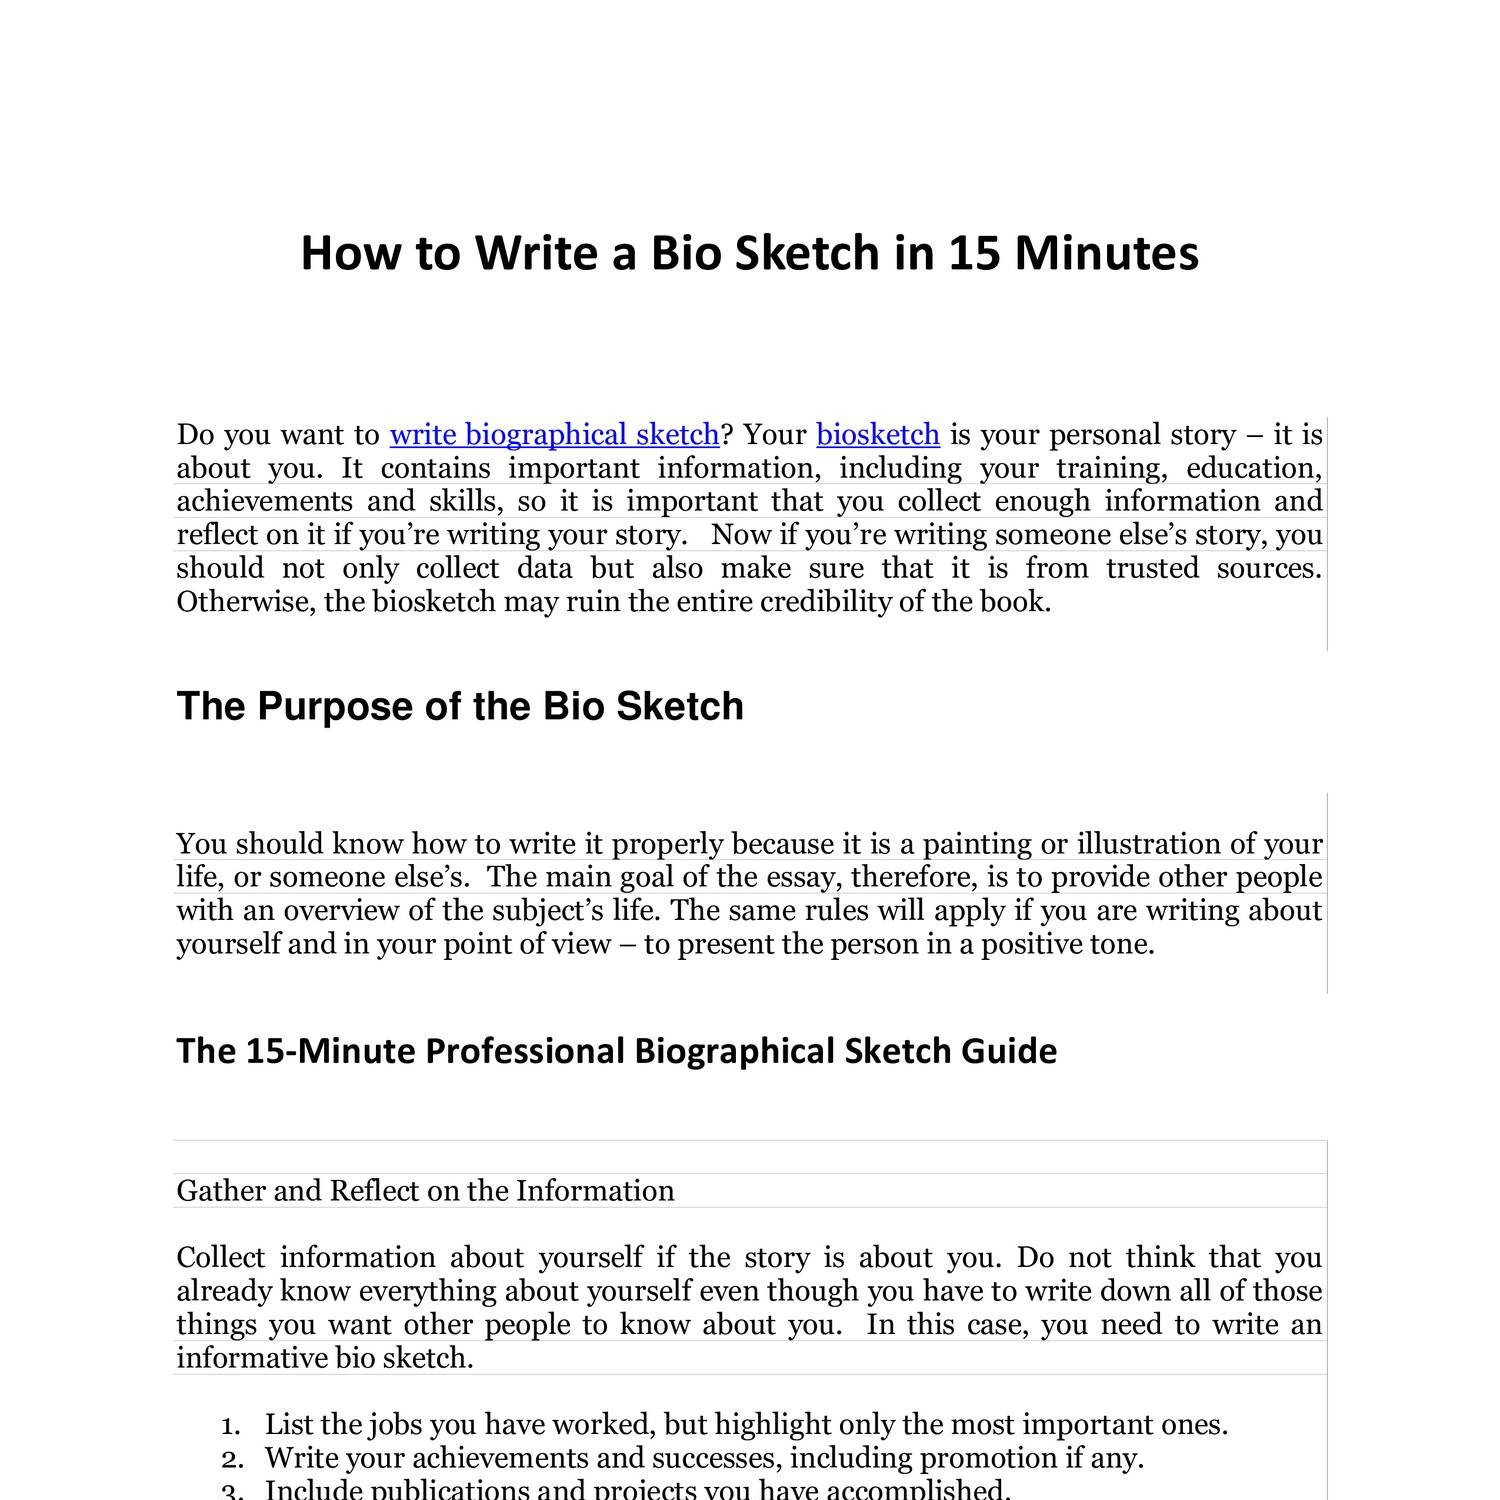 How to Write a Bio Sketch in 24 Minutes.pdf  DocDroid